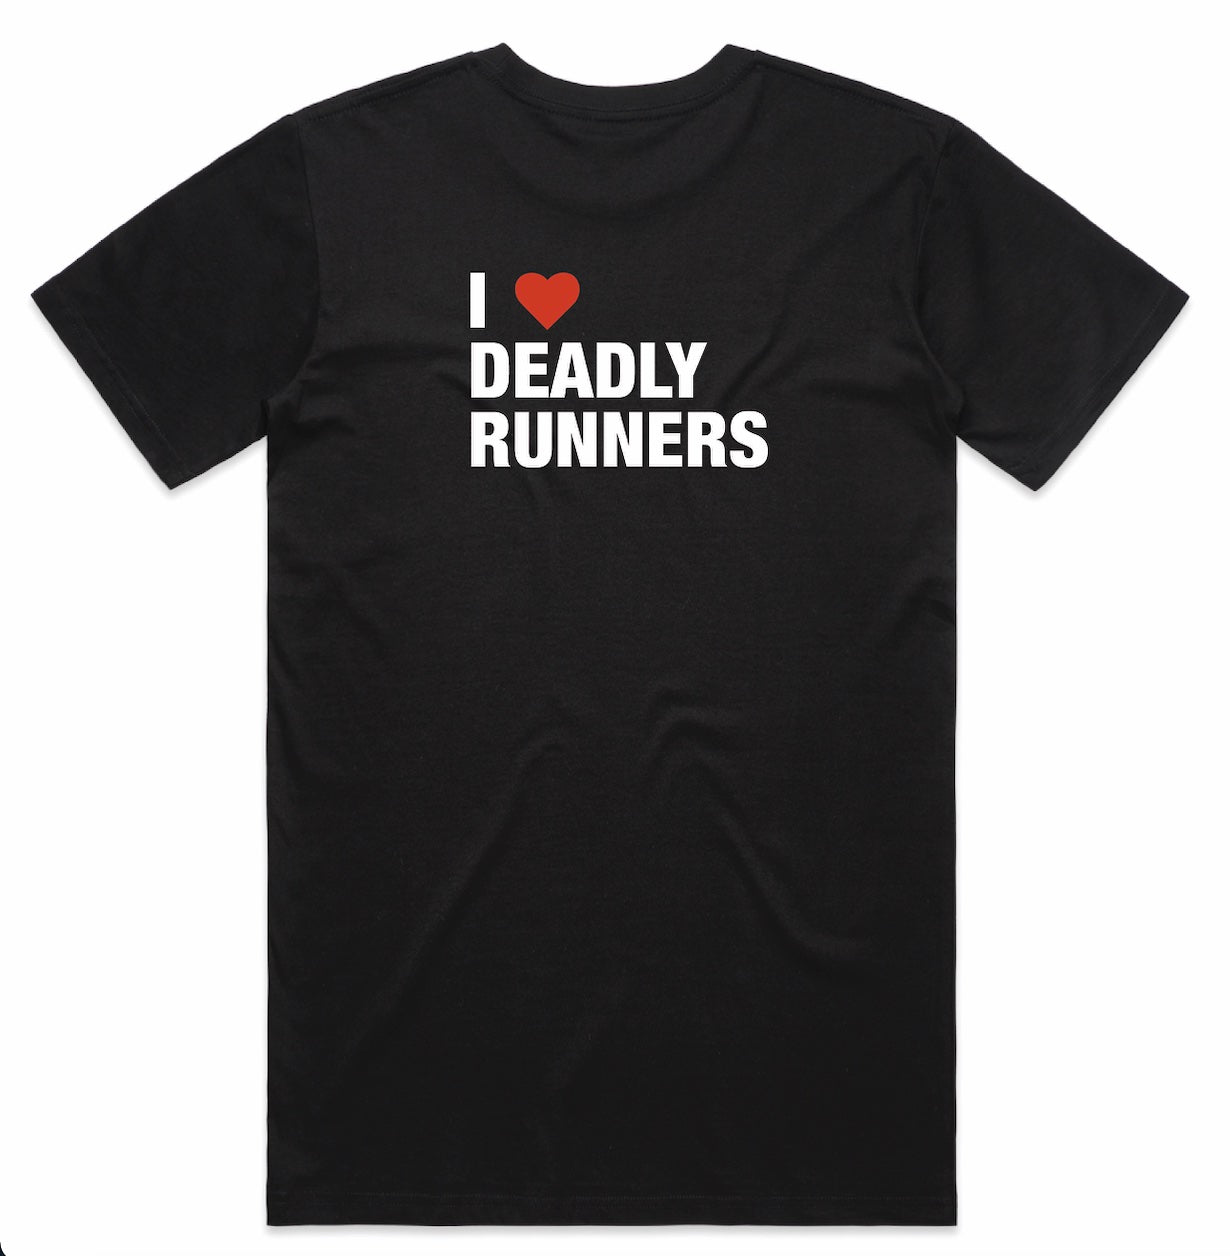 Front view unisex black tee with I heart Deadly Runners design